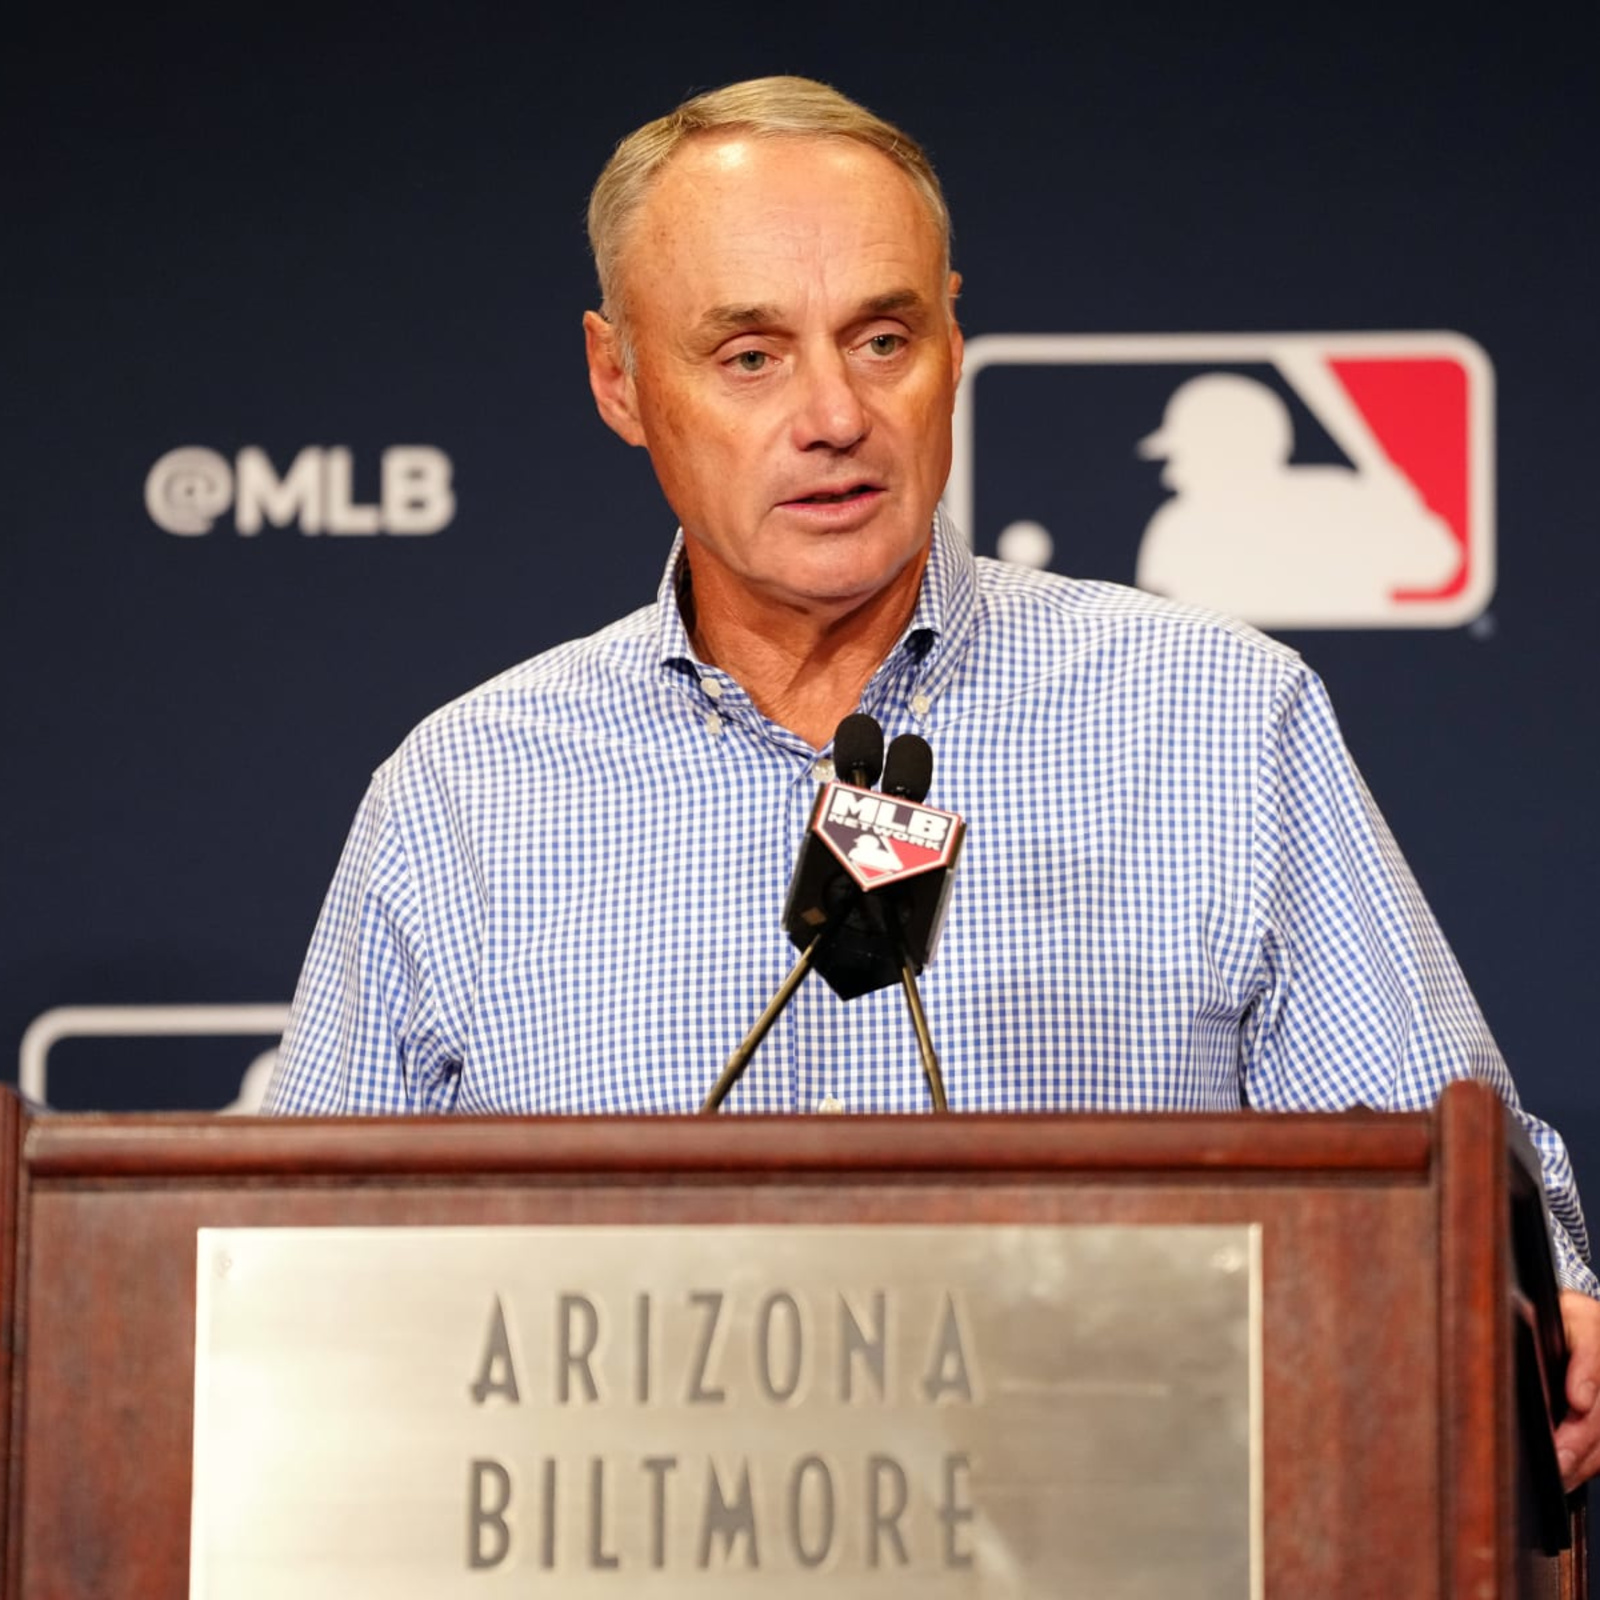 MLB commissioner Rob Manfred says A's fans 'reverse boycott' doesn